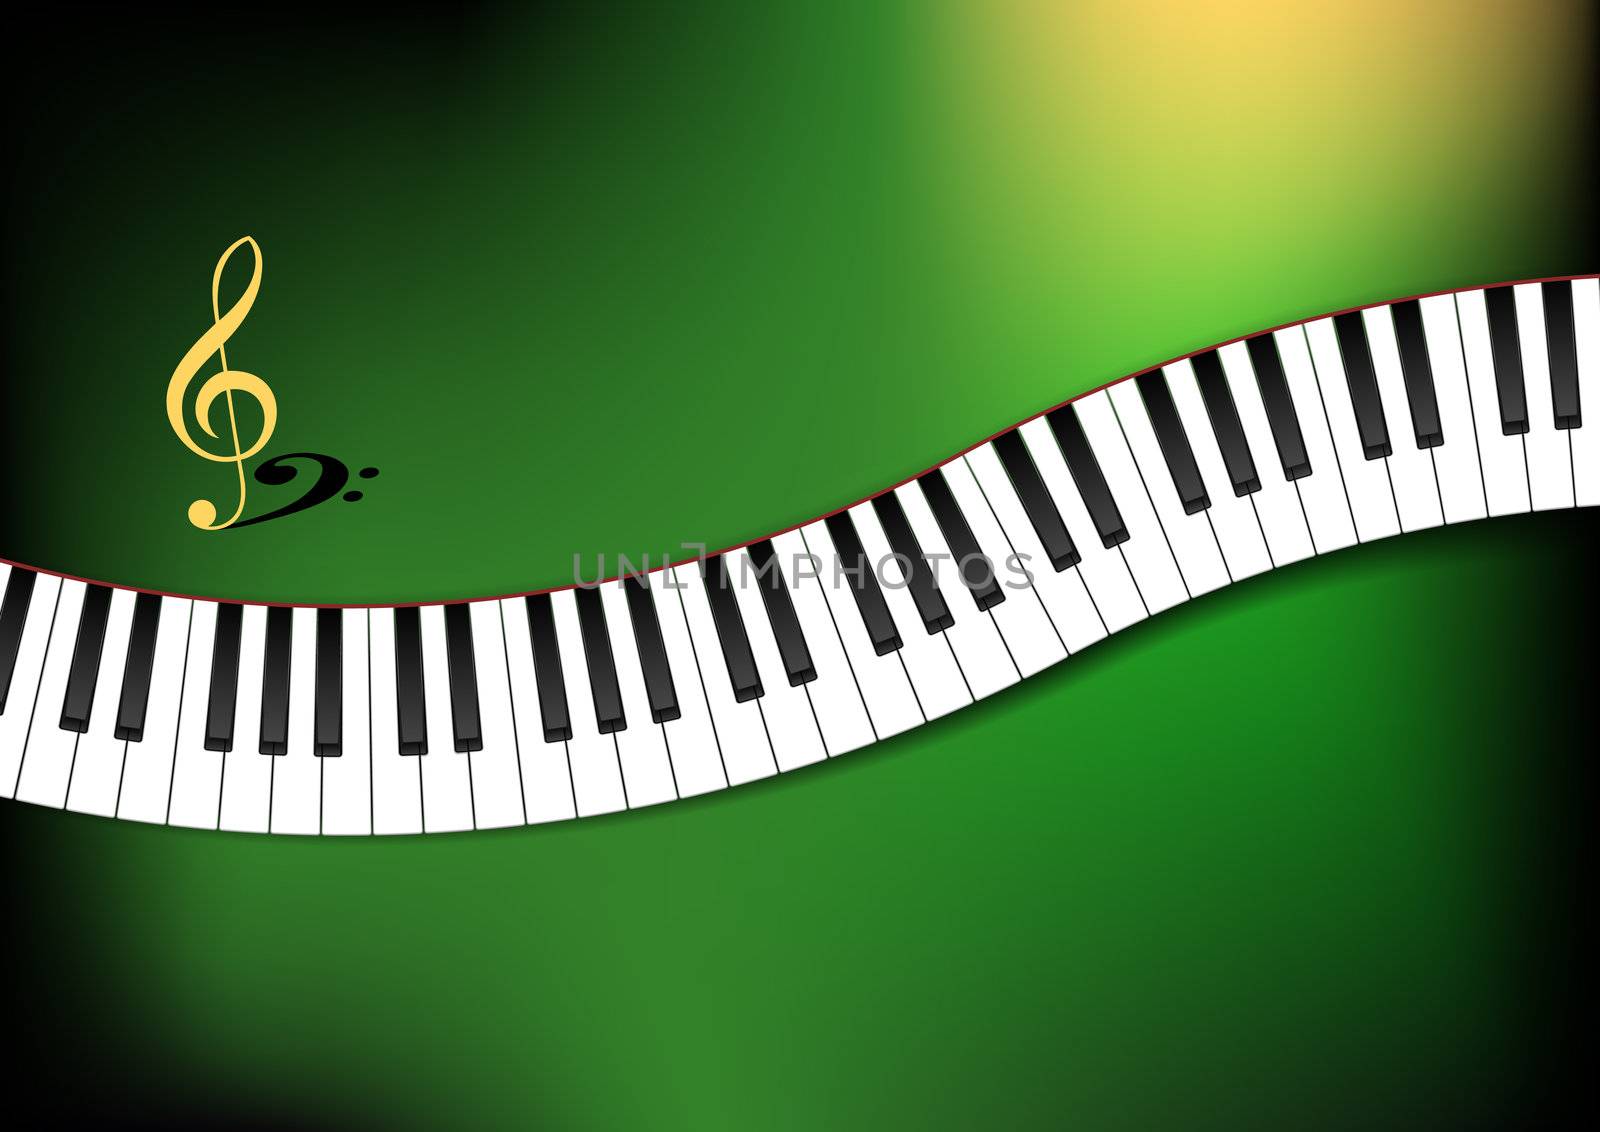 Green and Yellow Background Curved Piano Keyboard by bmelo